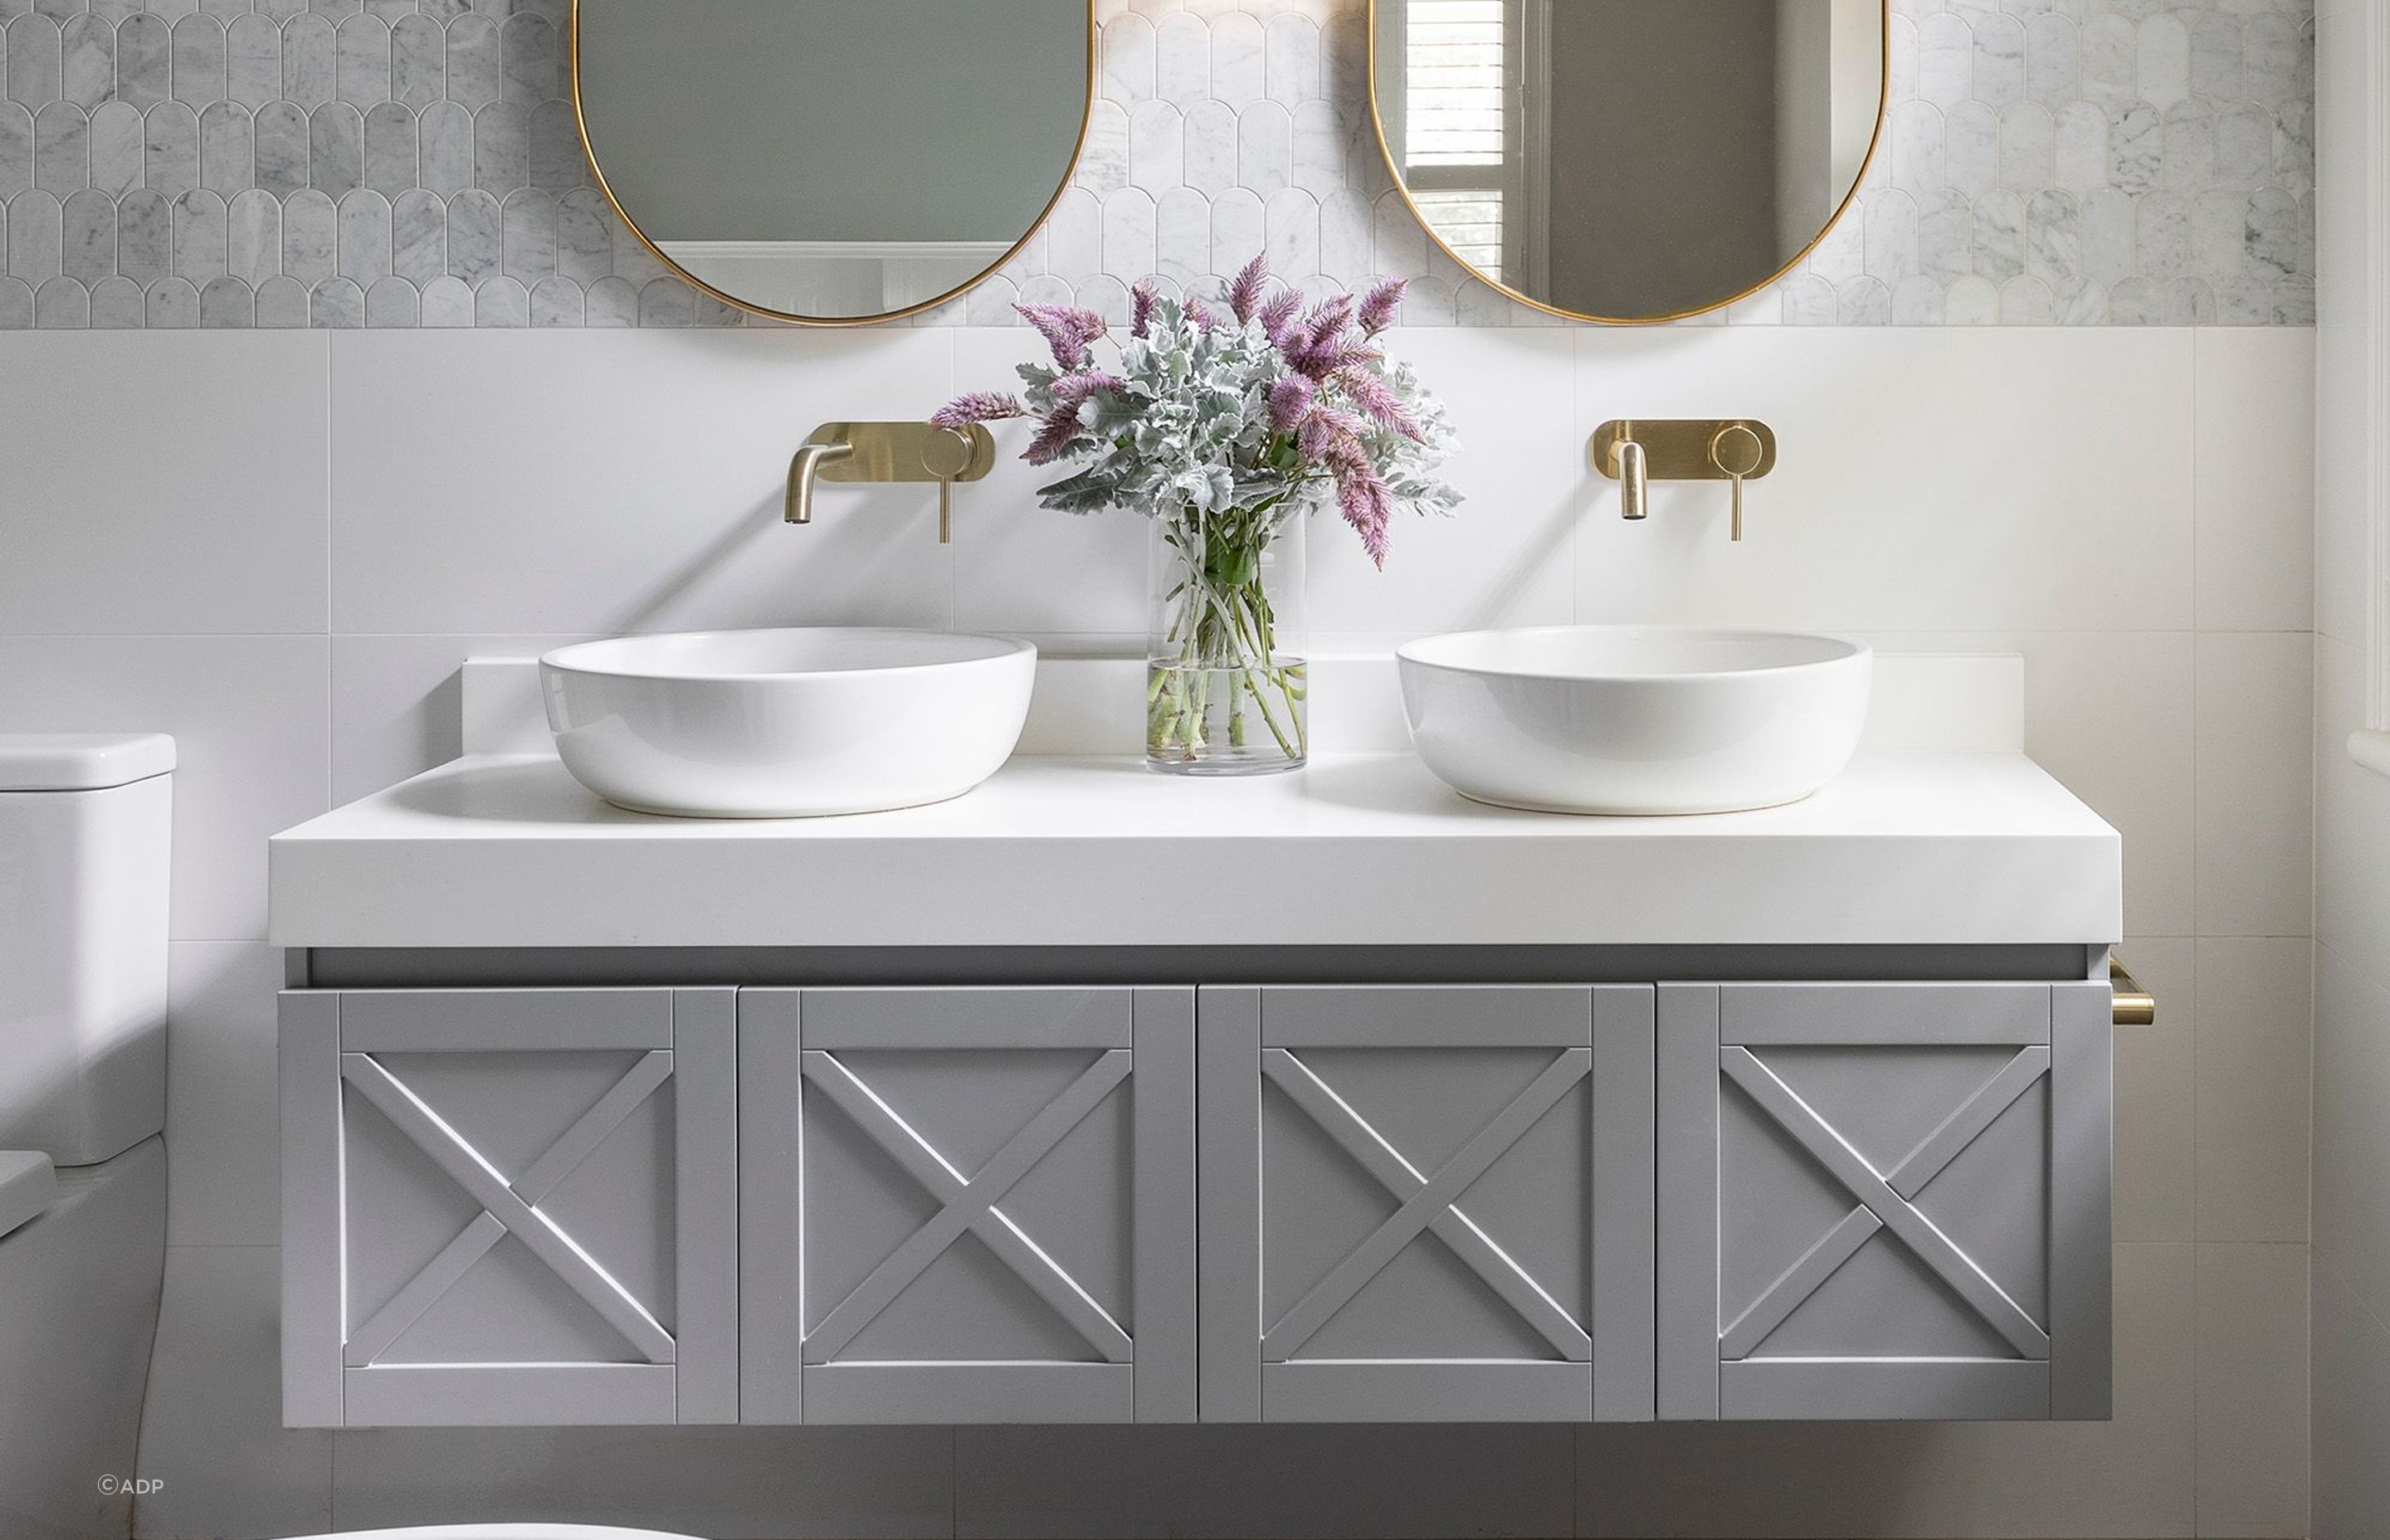 Double bathroom vanities are perfect for larger bathrooms